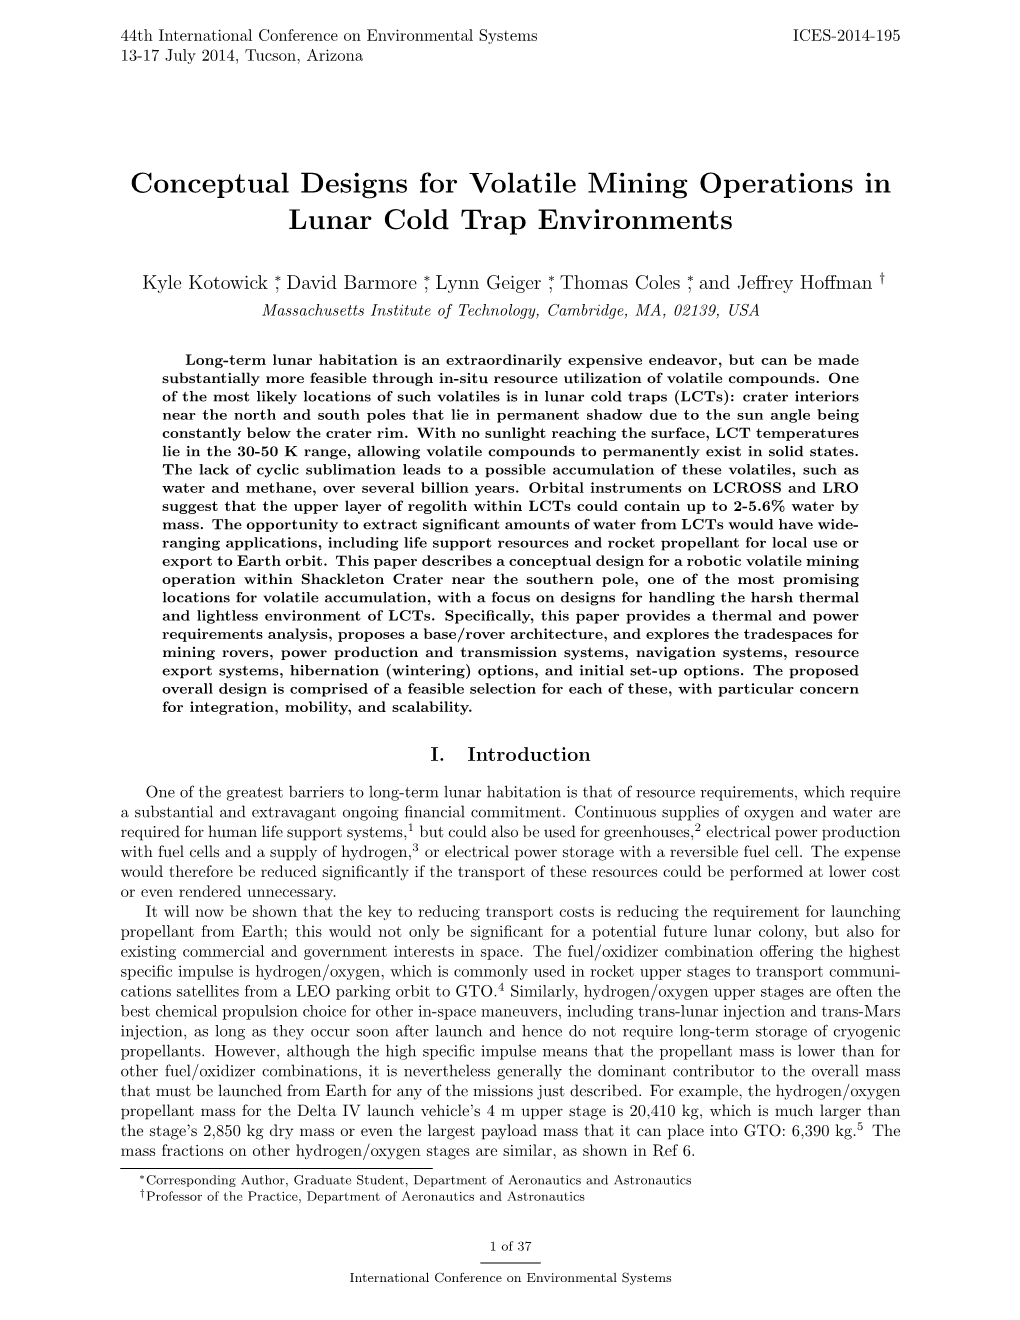 Conceptual Designs for Volatile Mining Operations in Lunar Cold Trap Environments